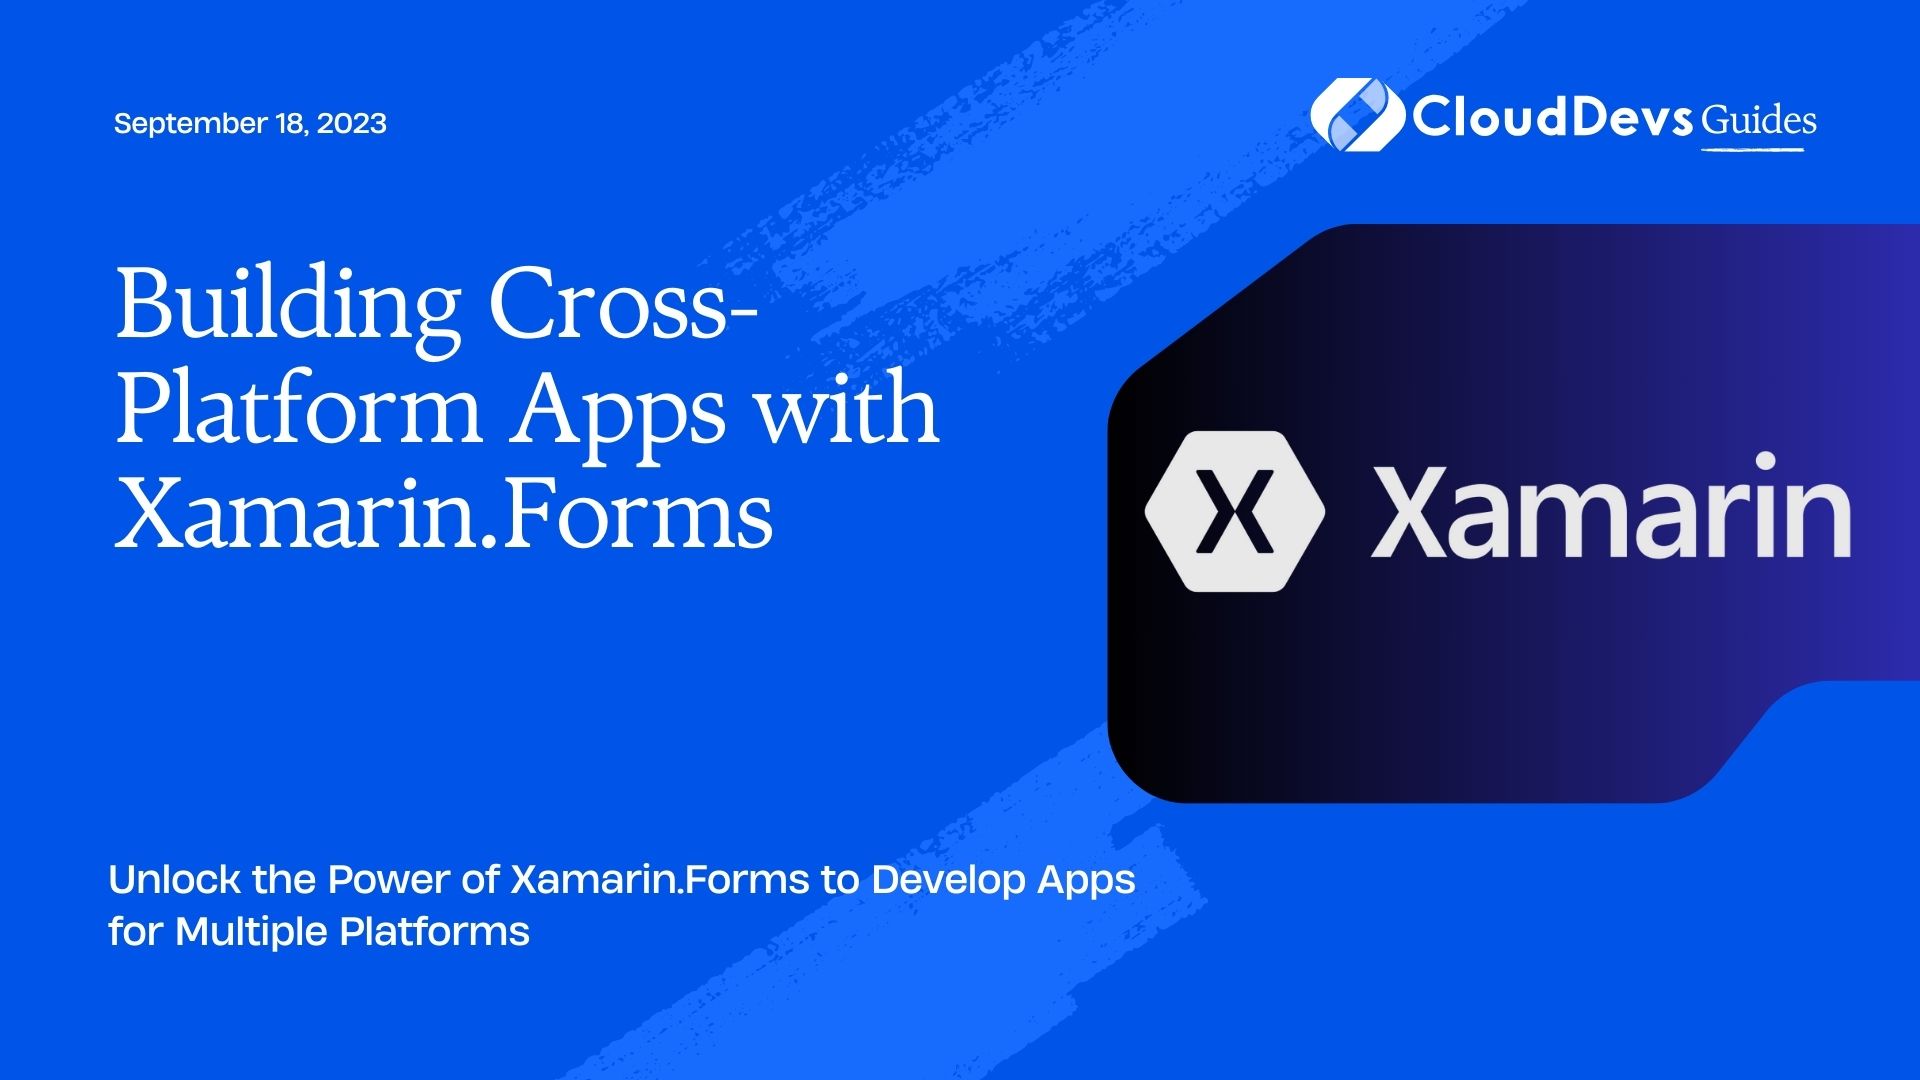 Building Cross-Platform Apps with Xamarin.Forms